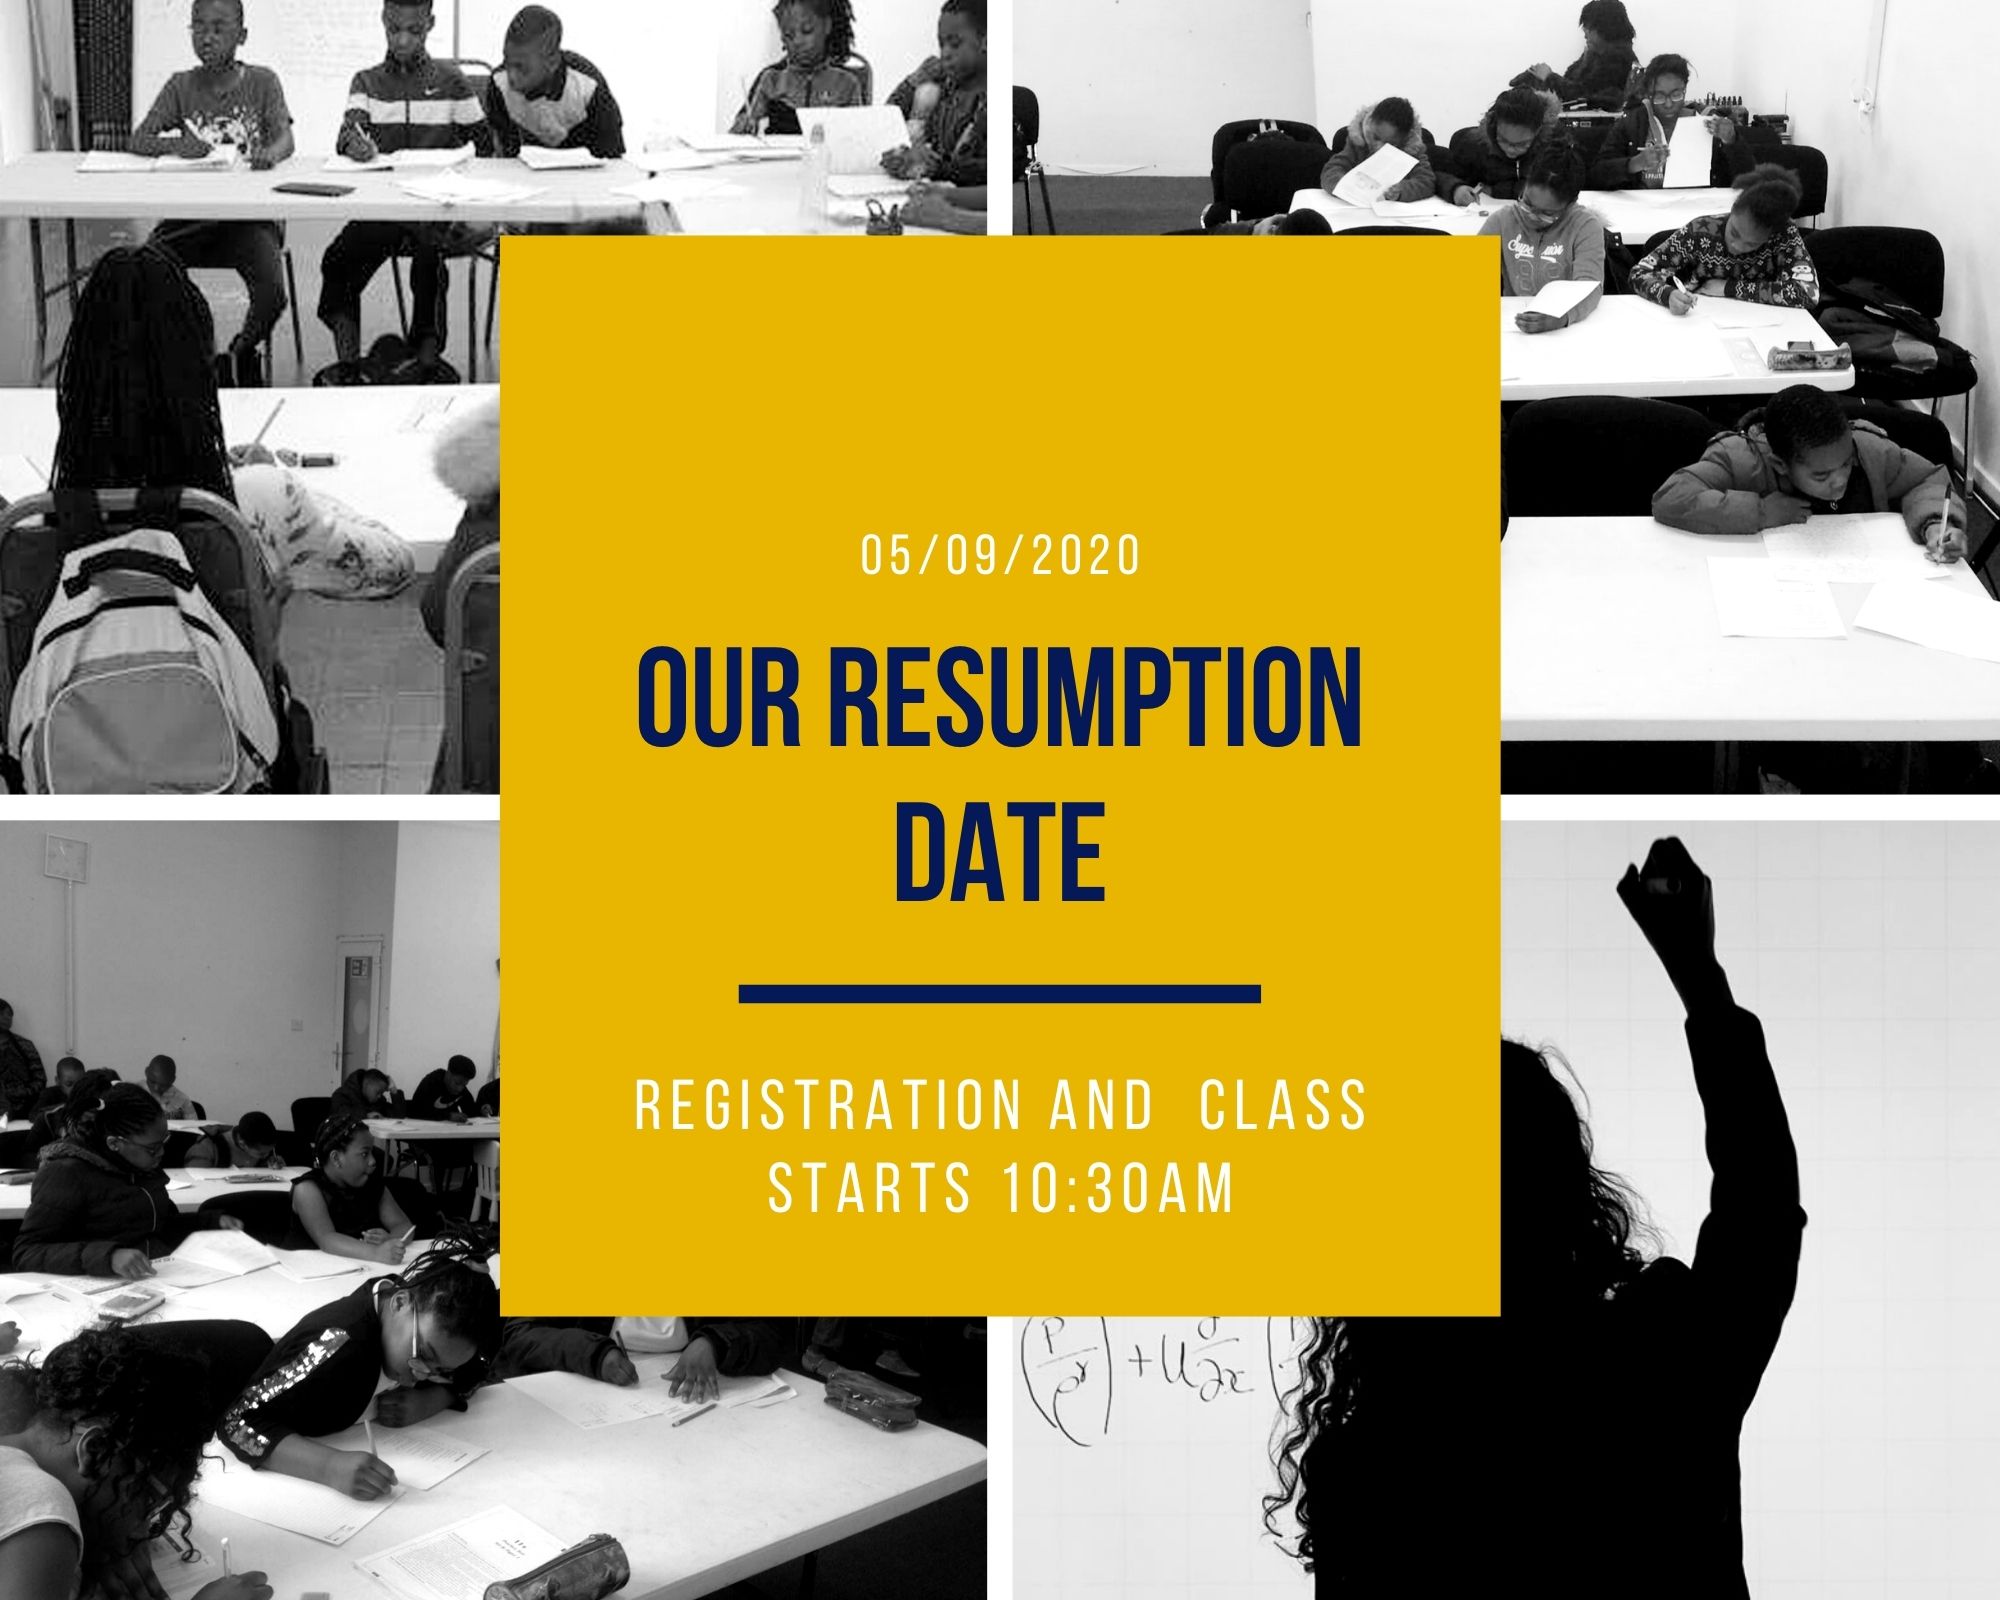 Our resumption date